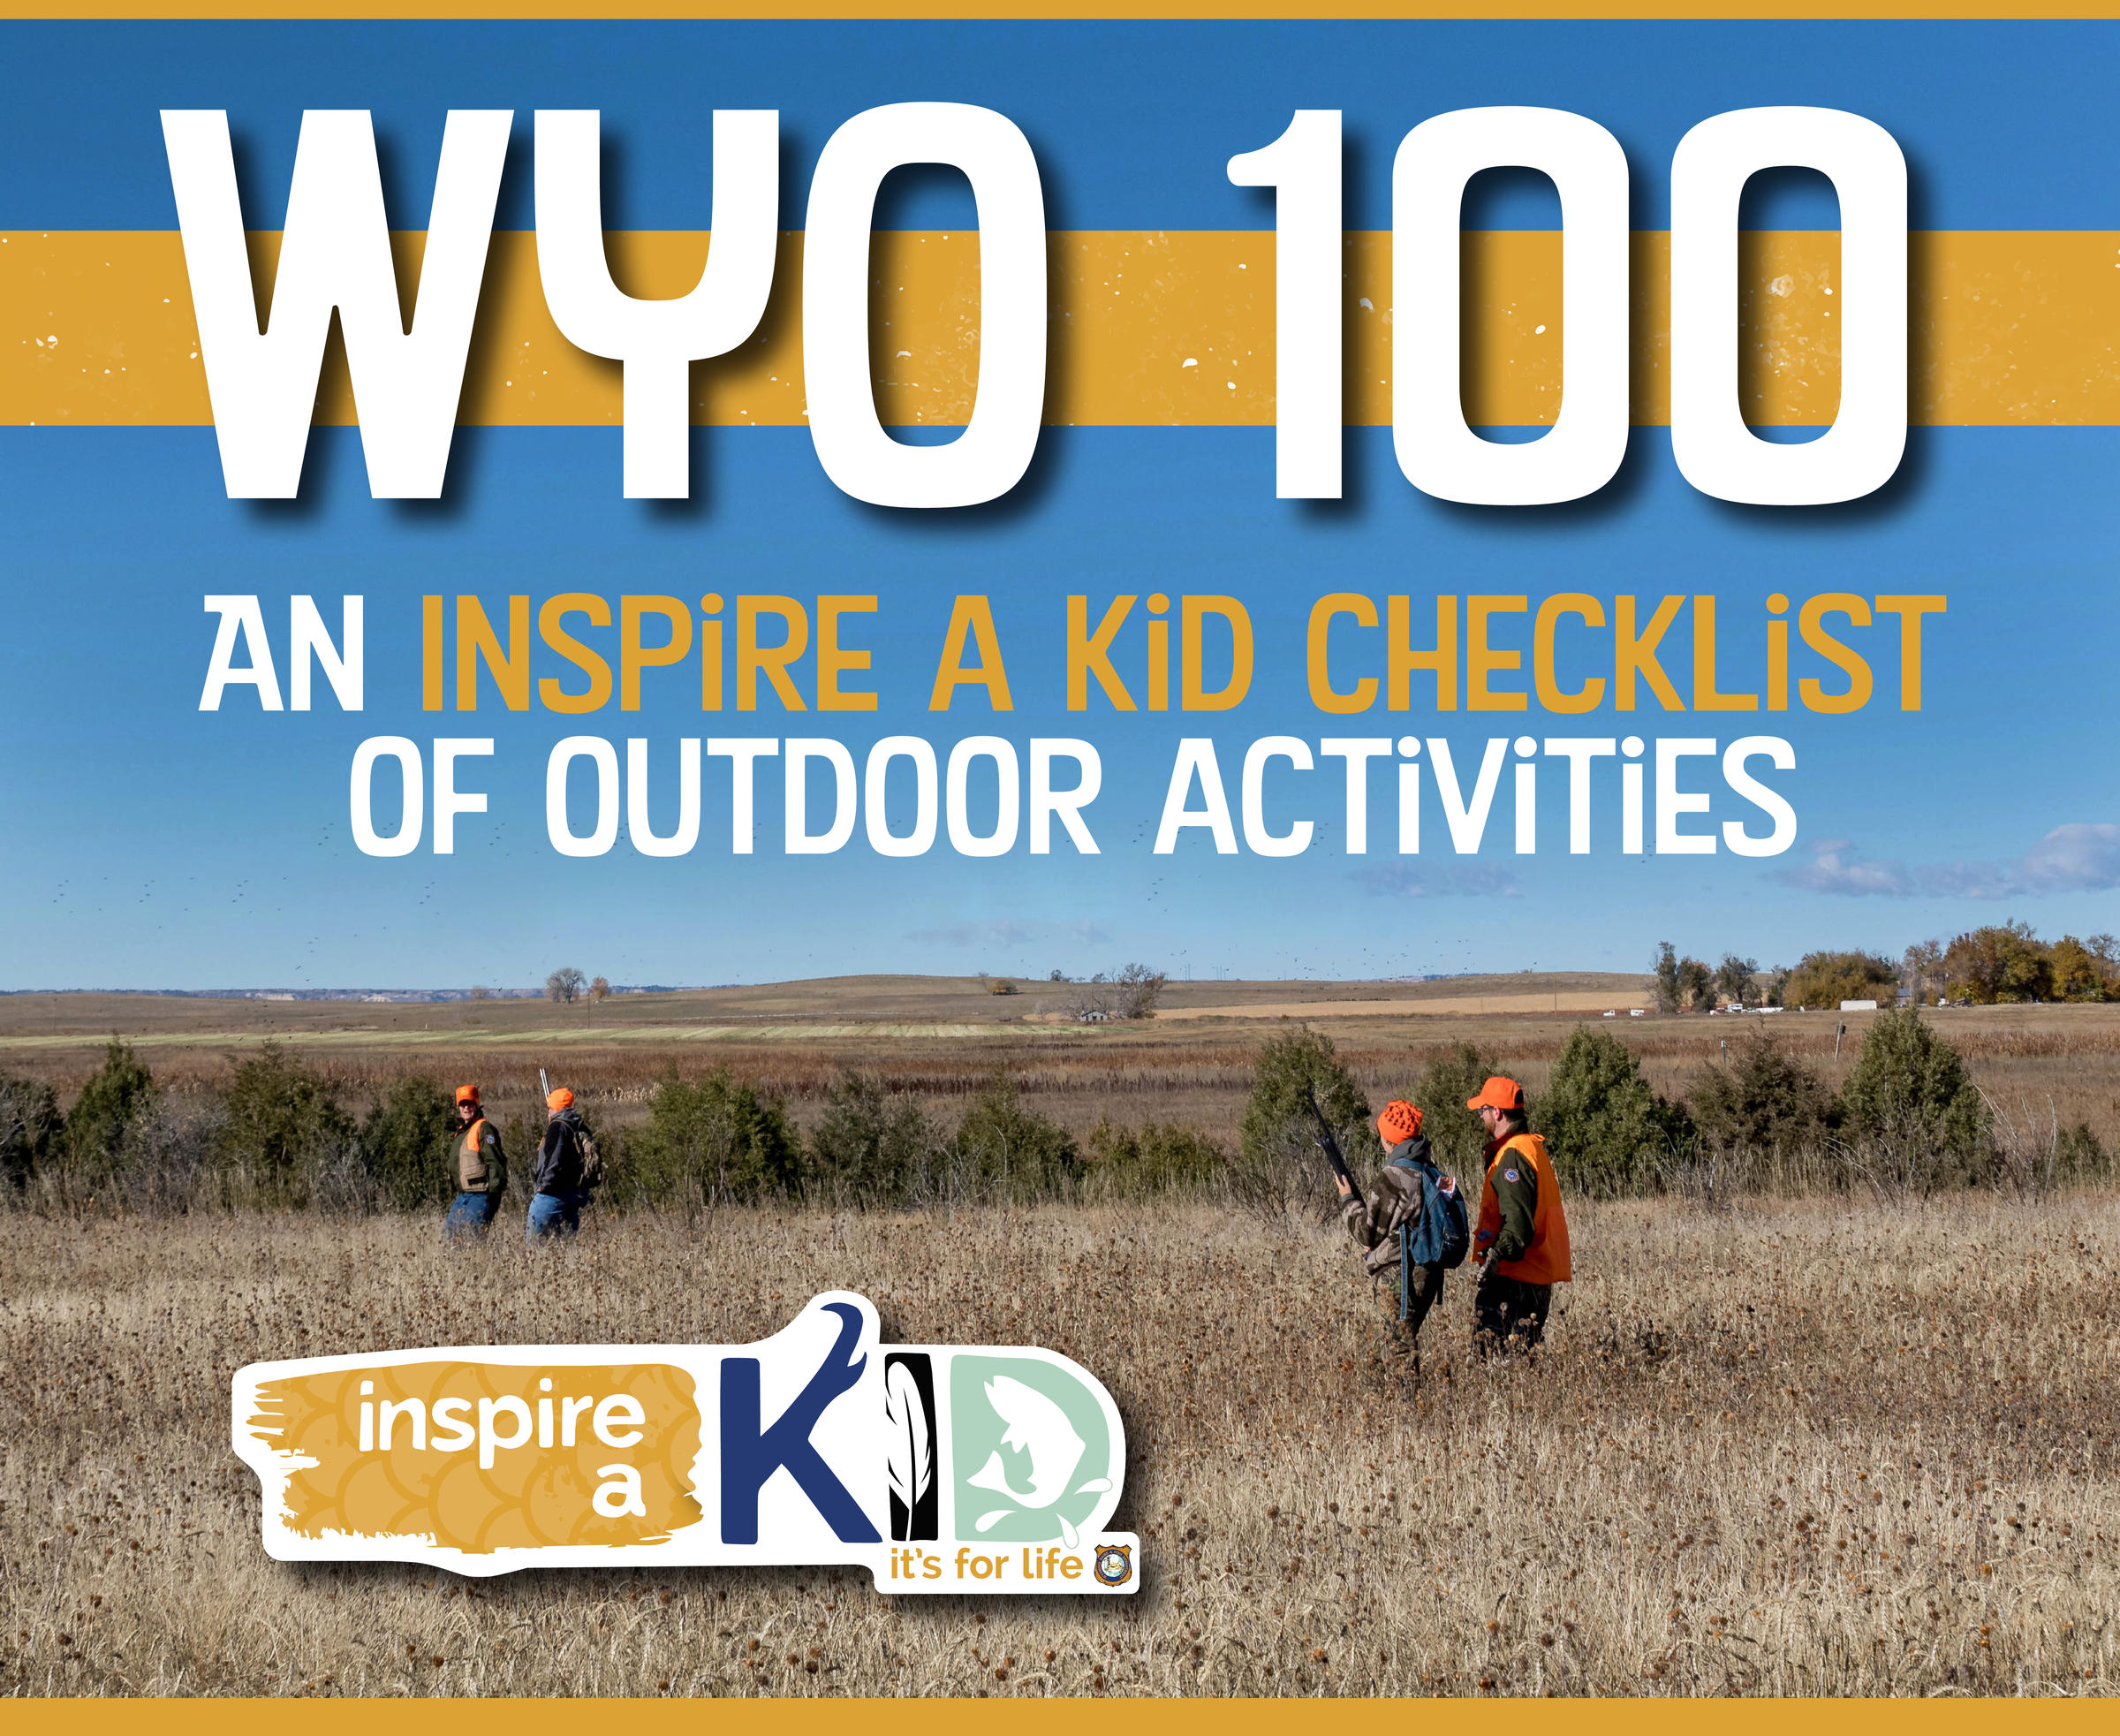 Wyoming Game And Fish Encourages Outdoor Exploration | Wyoming Public Media